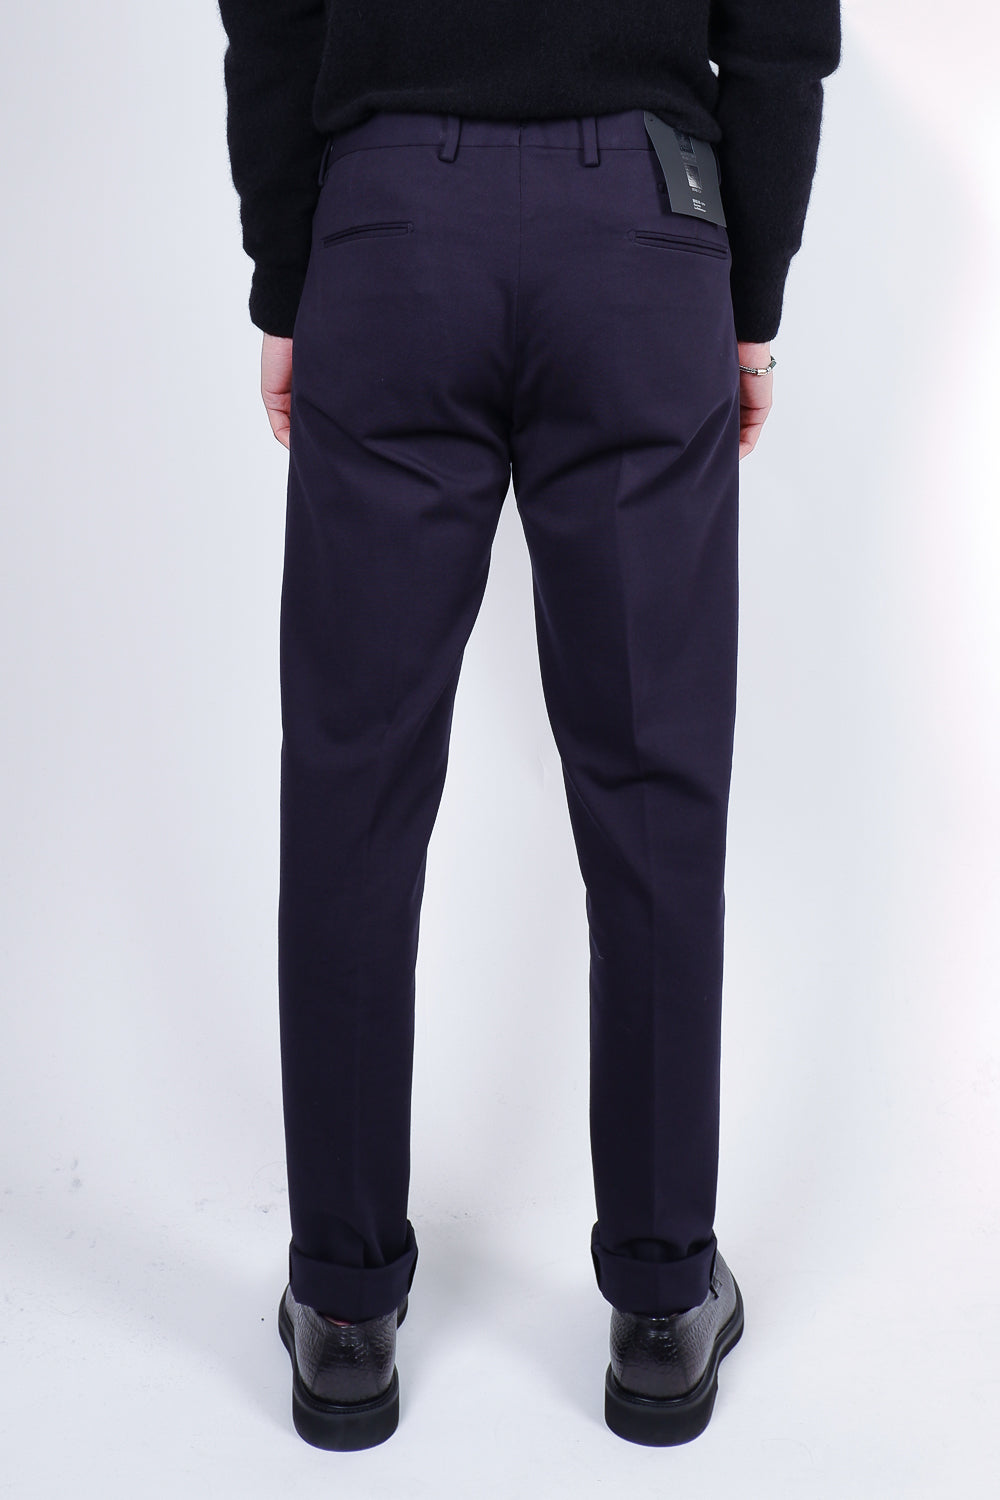 Buy the Briglia Cotton Stretch Smart Trouser in Navy at Intro. Spend £50 for free UK delivery. Official stockists. We ship worldwide.